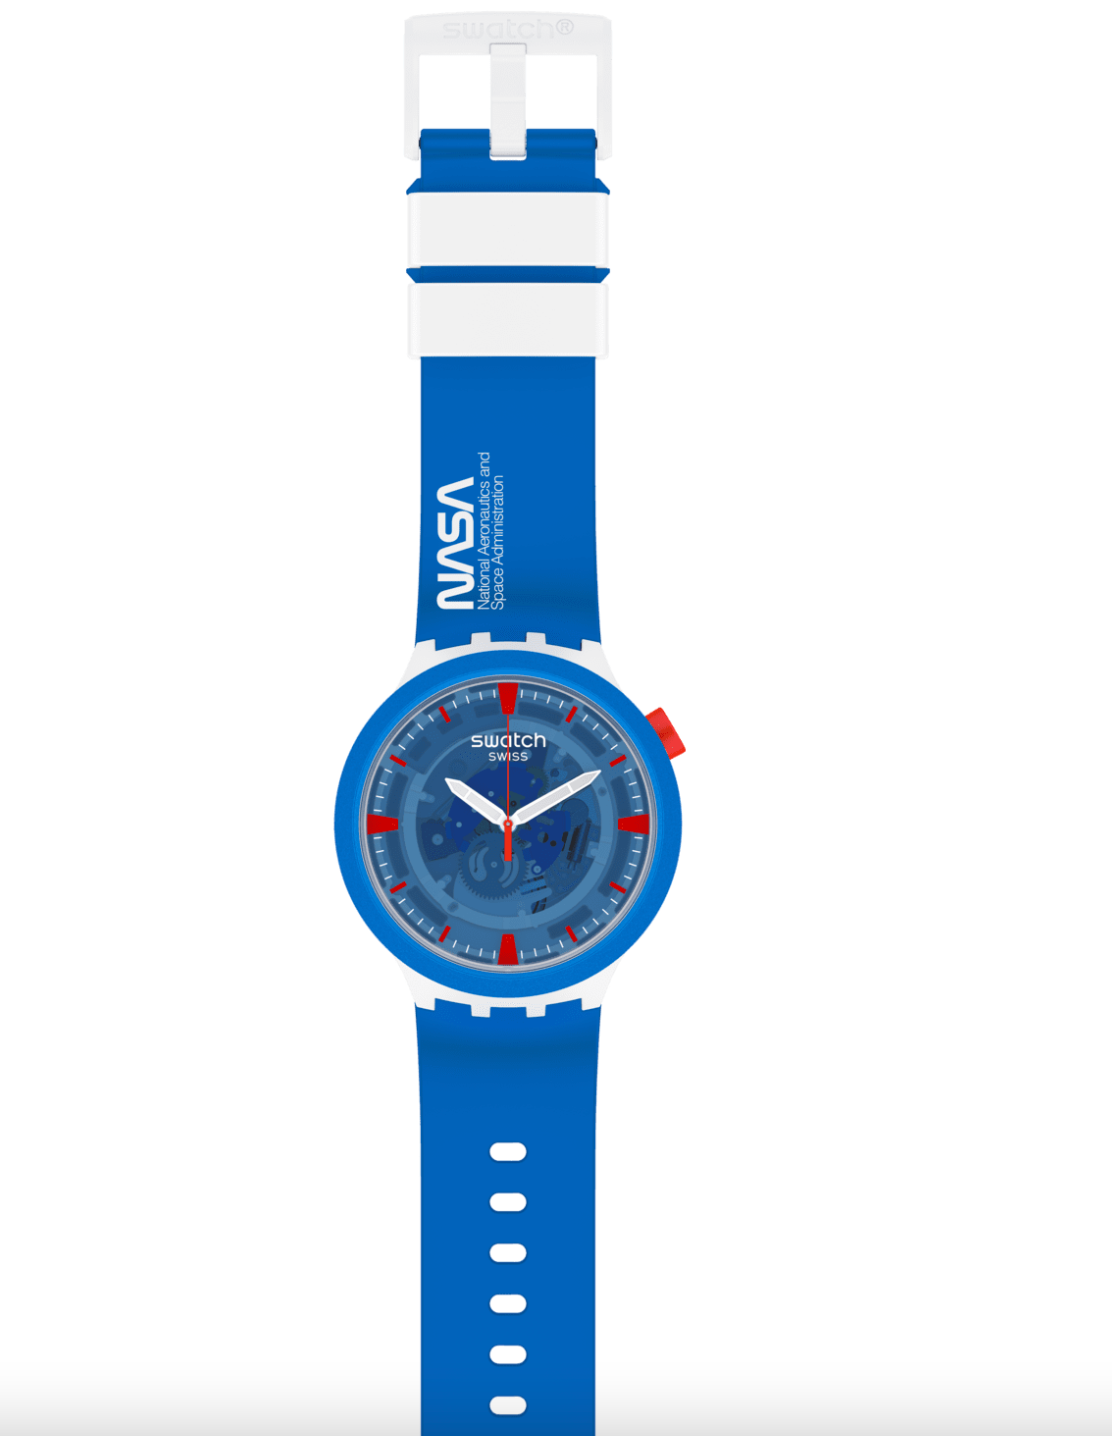 Swatch Space Collection Nasa Jumpsuit Bioceramic Watch New with Box